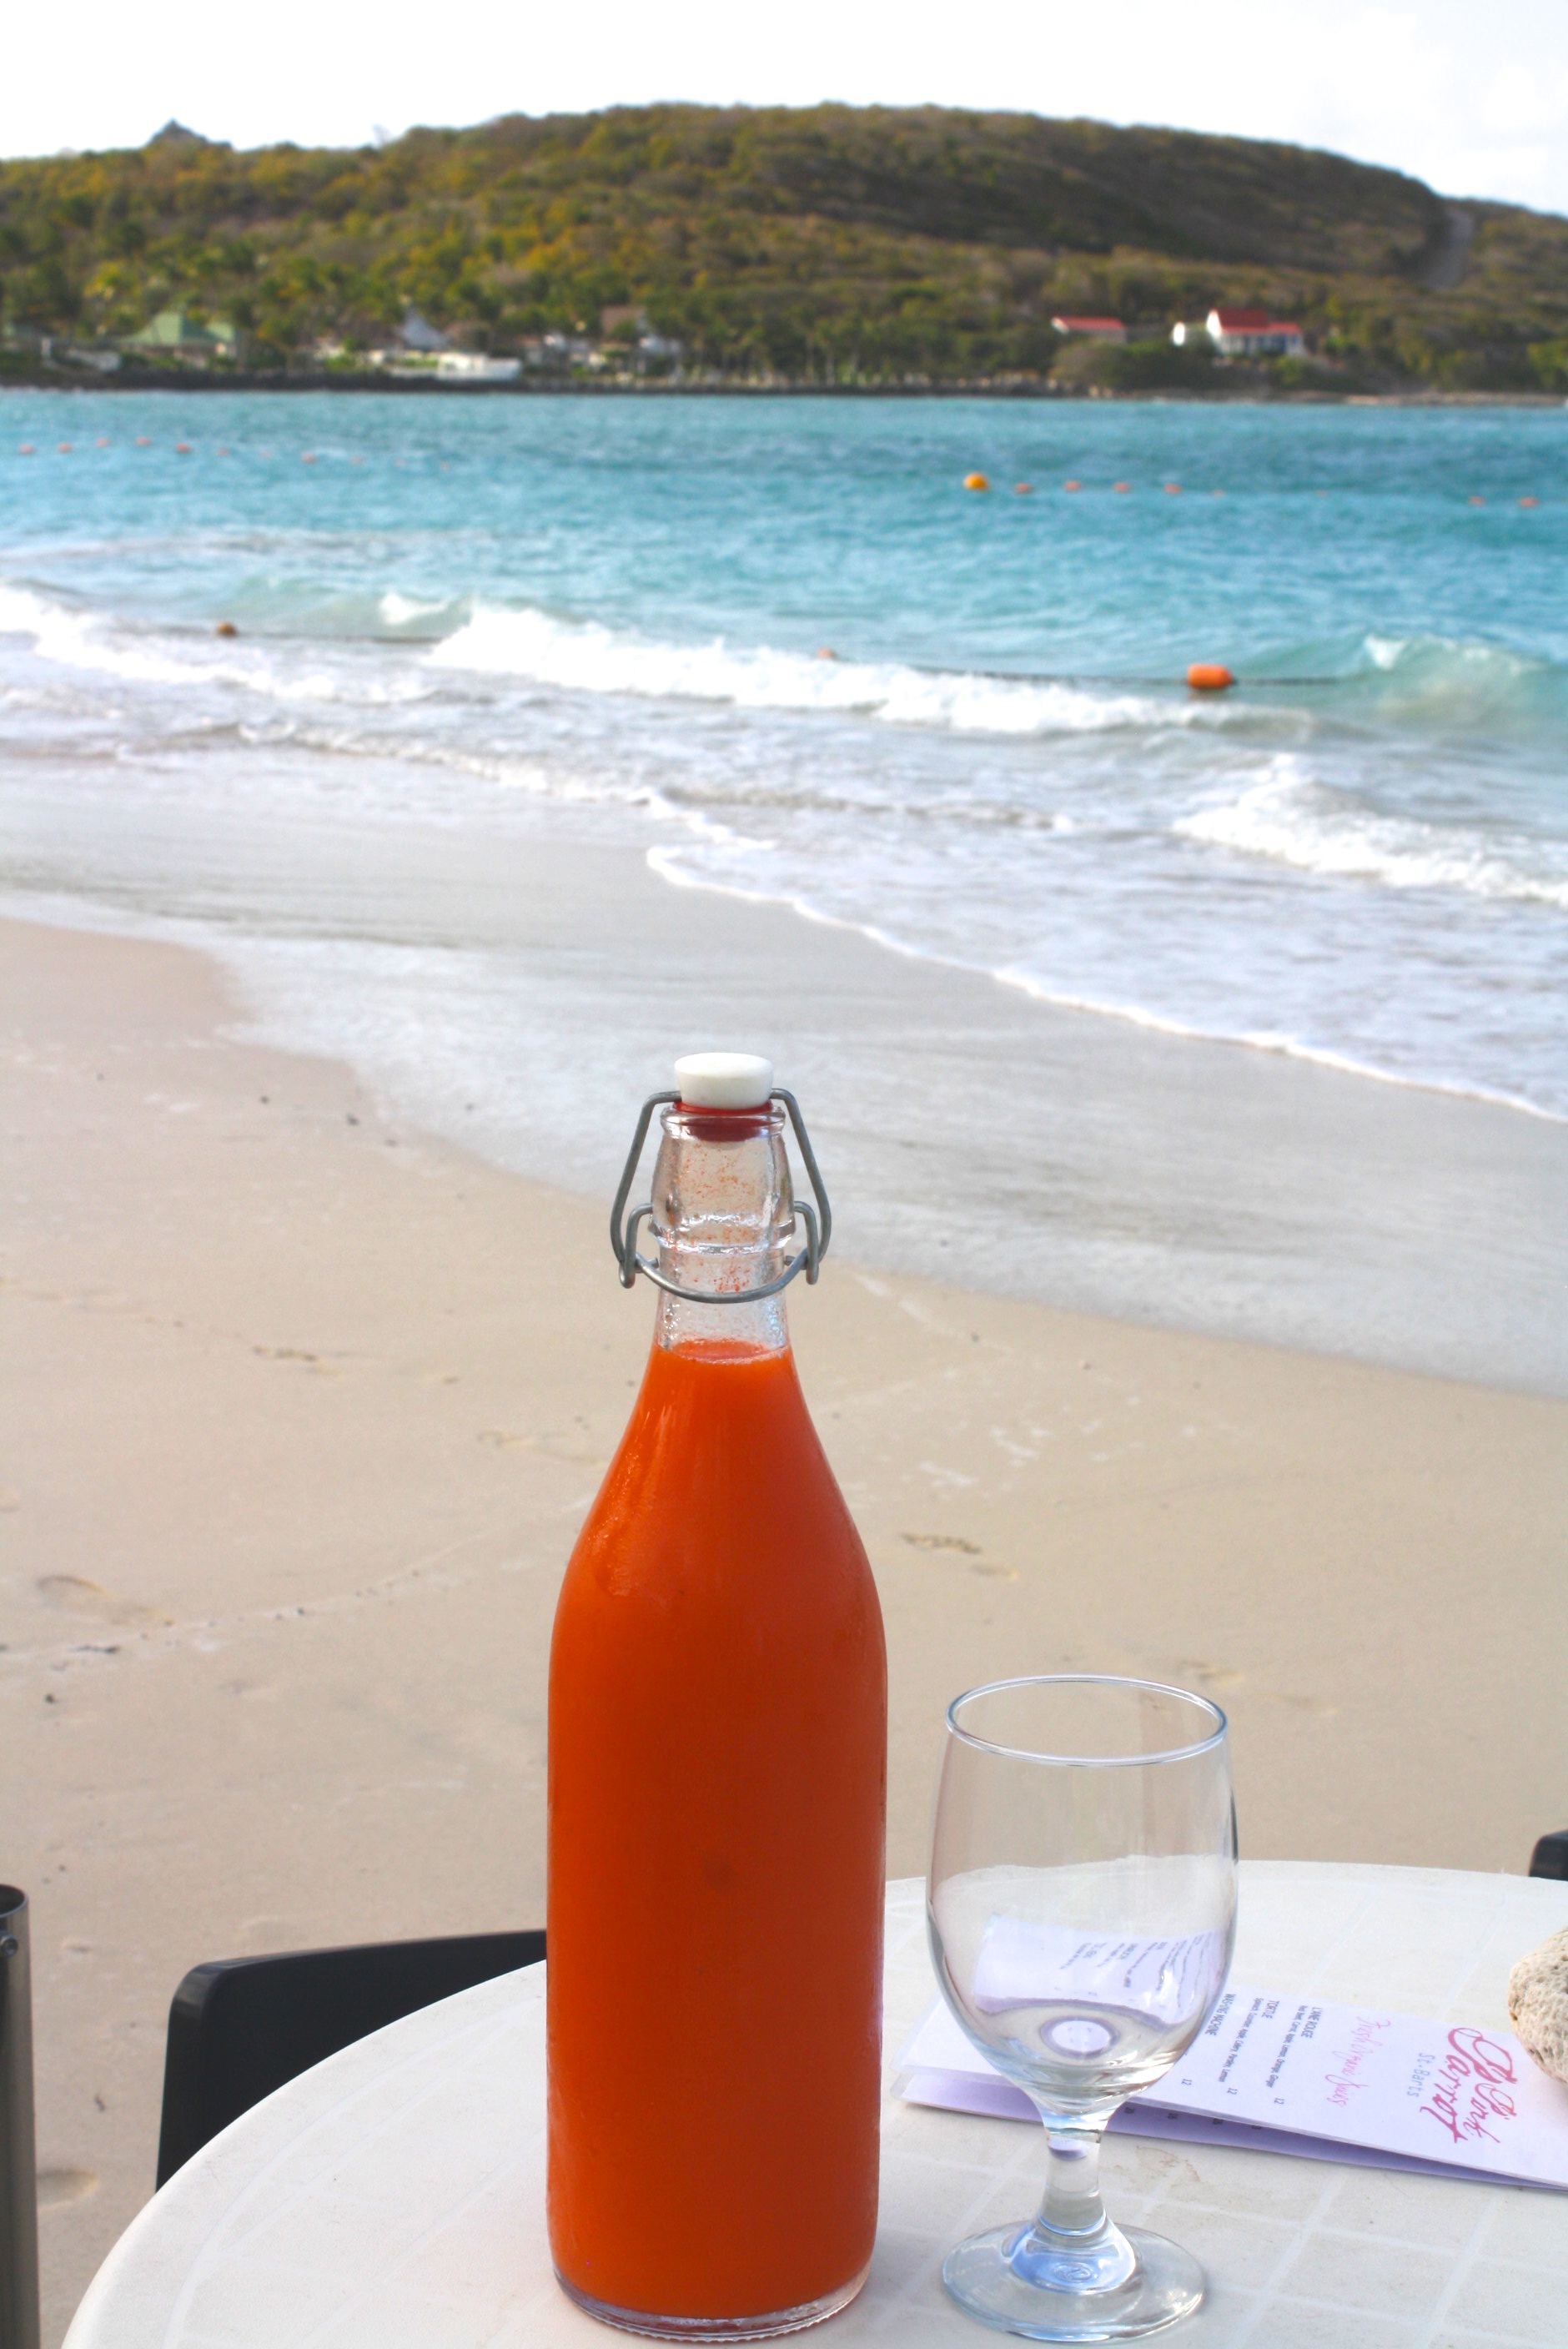 Where to Eat, Drink & Carouse in St. Barts – A place to drink